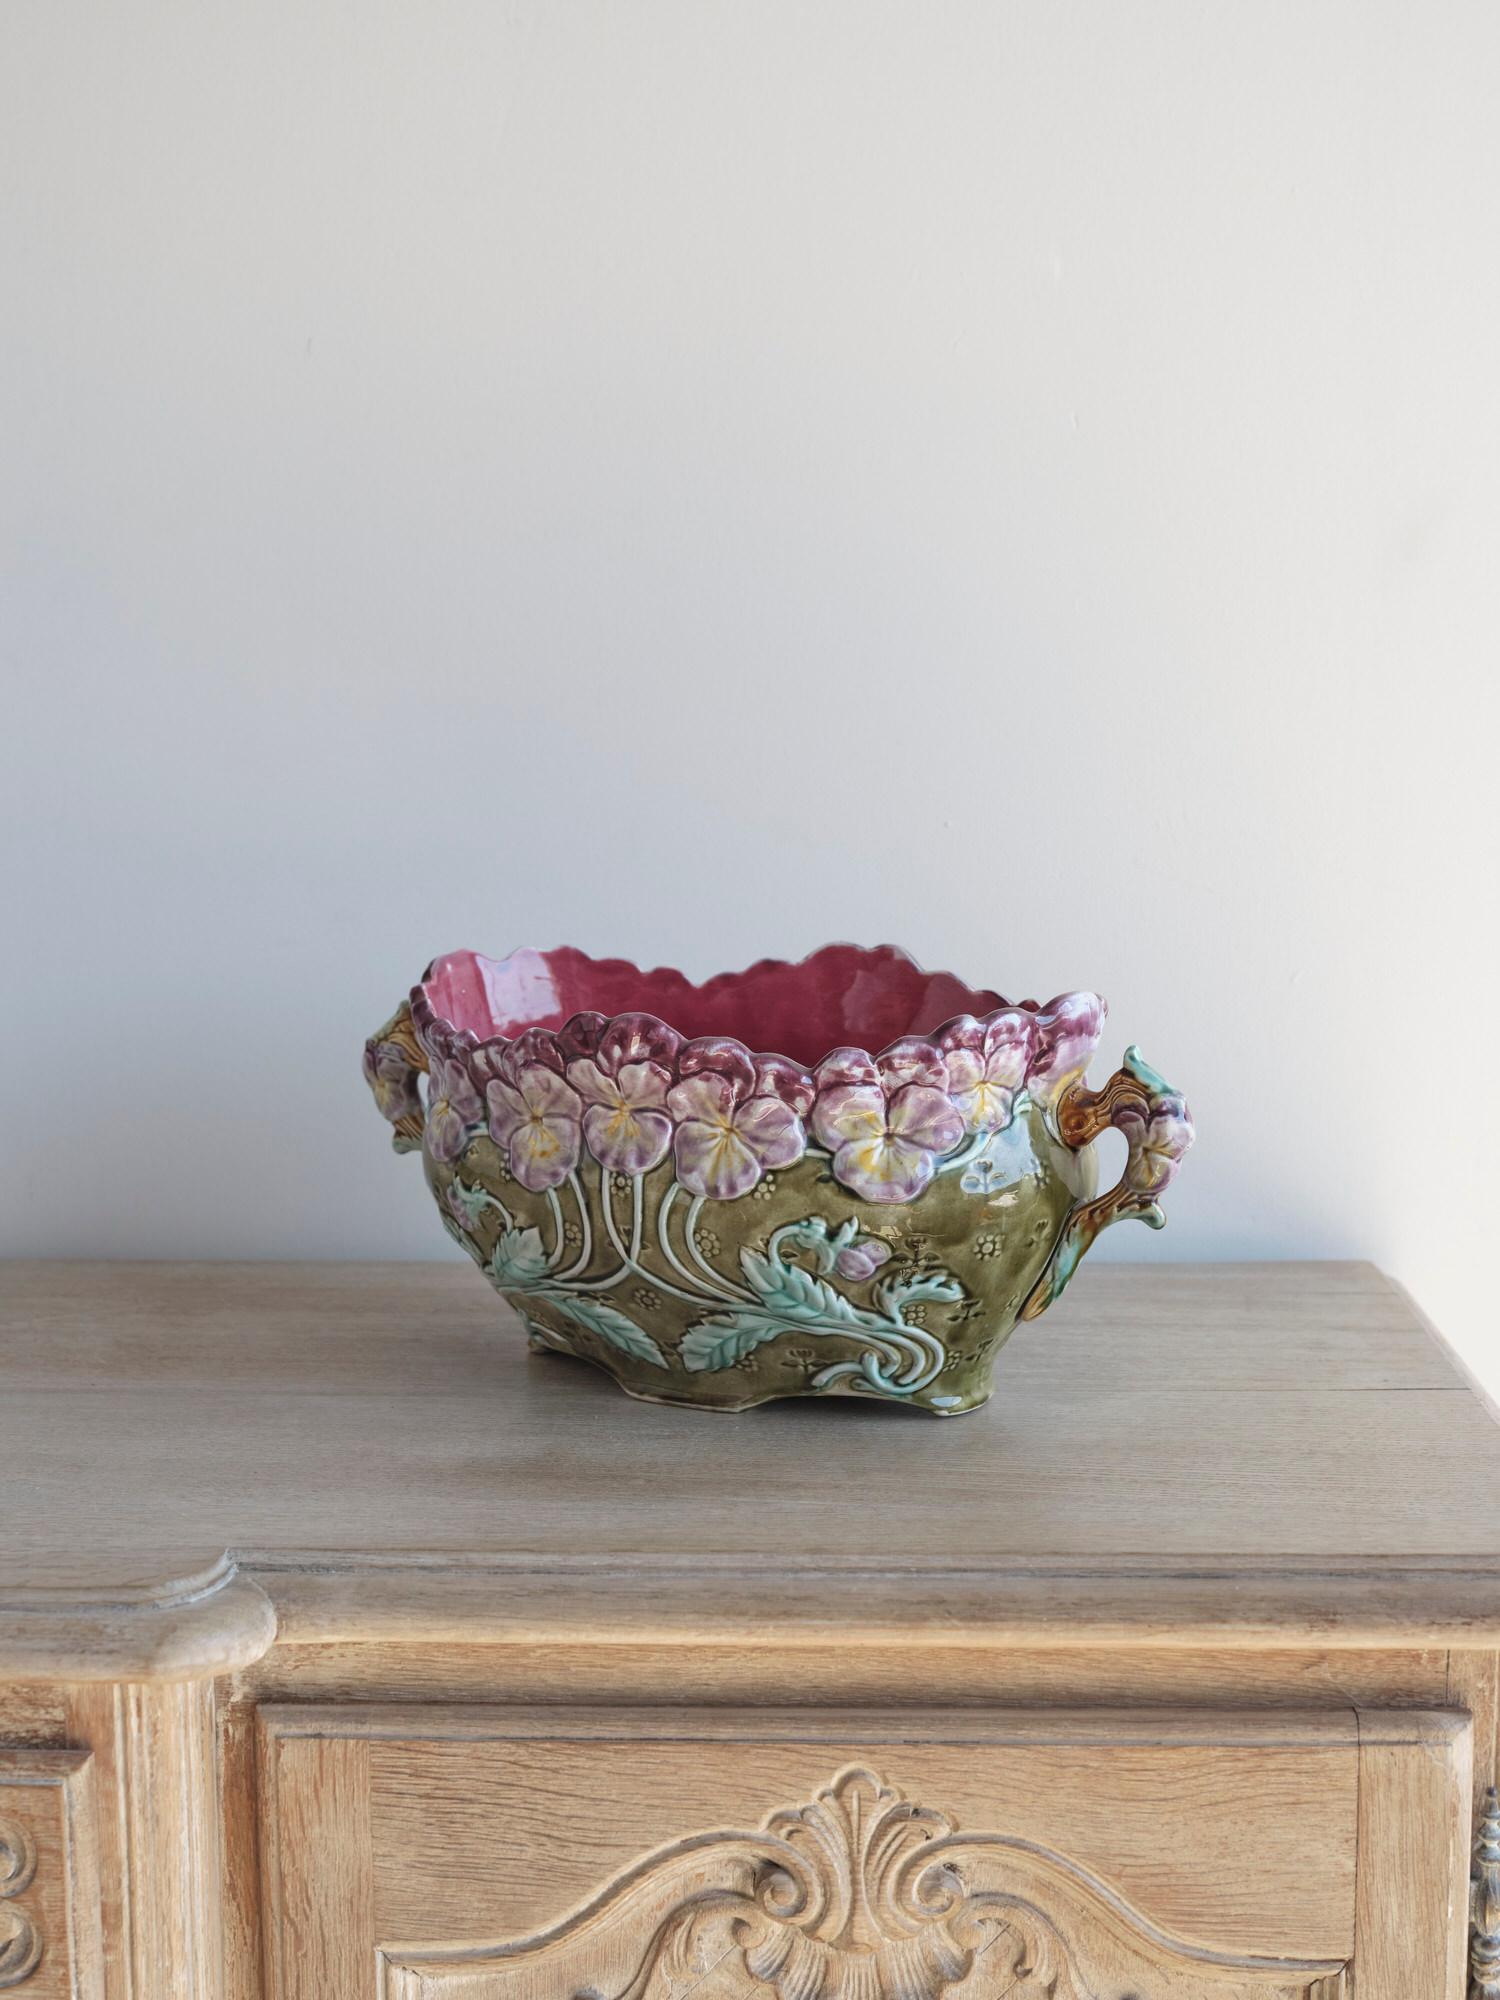 This beautiful French Majolica flower planter, circa 1900, has so many lovely details and vibrant colors. The dominating colors are purple and green. There are several purple flowers with a green background color. The interior of the bowl is a light